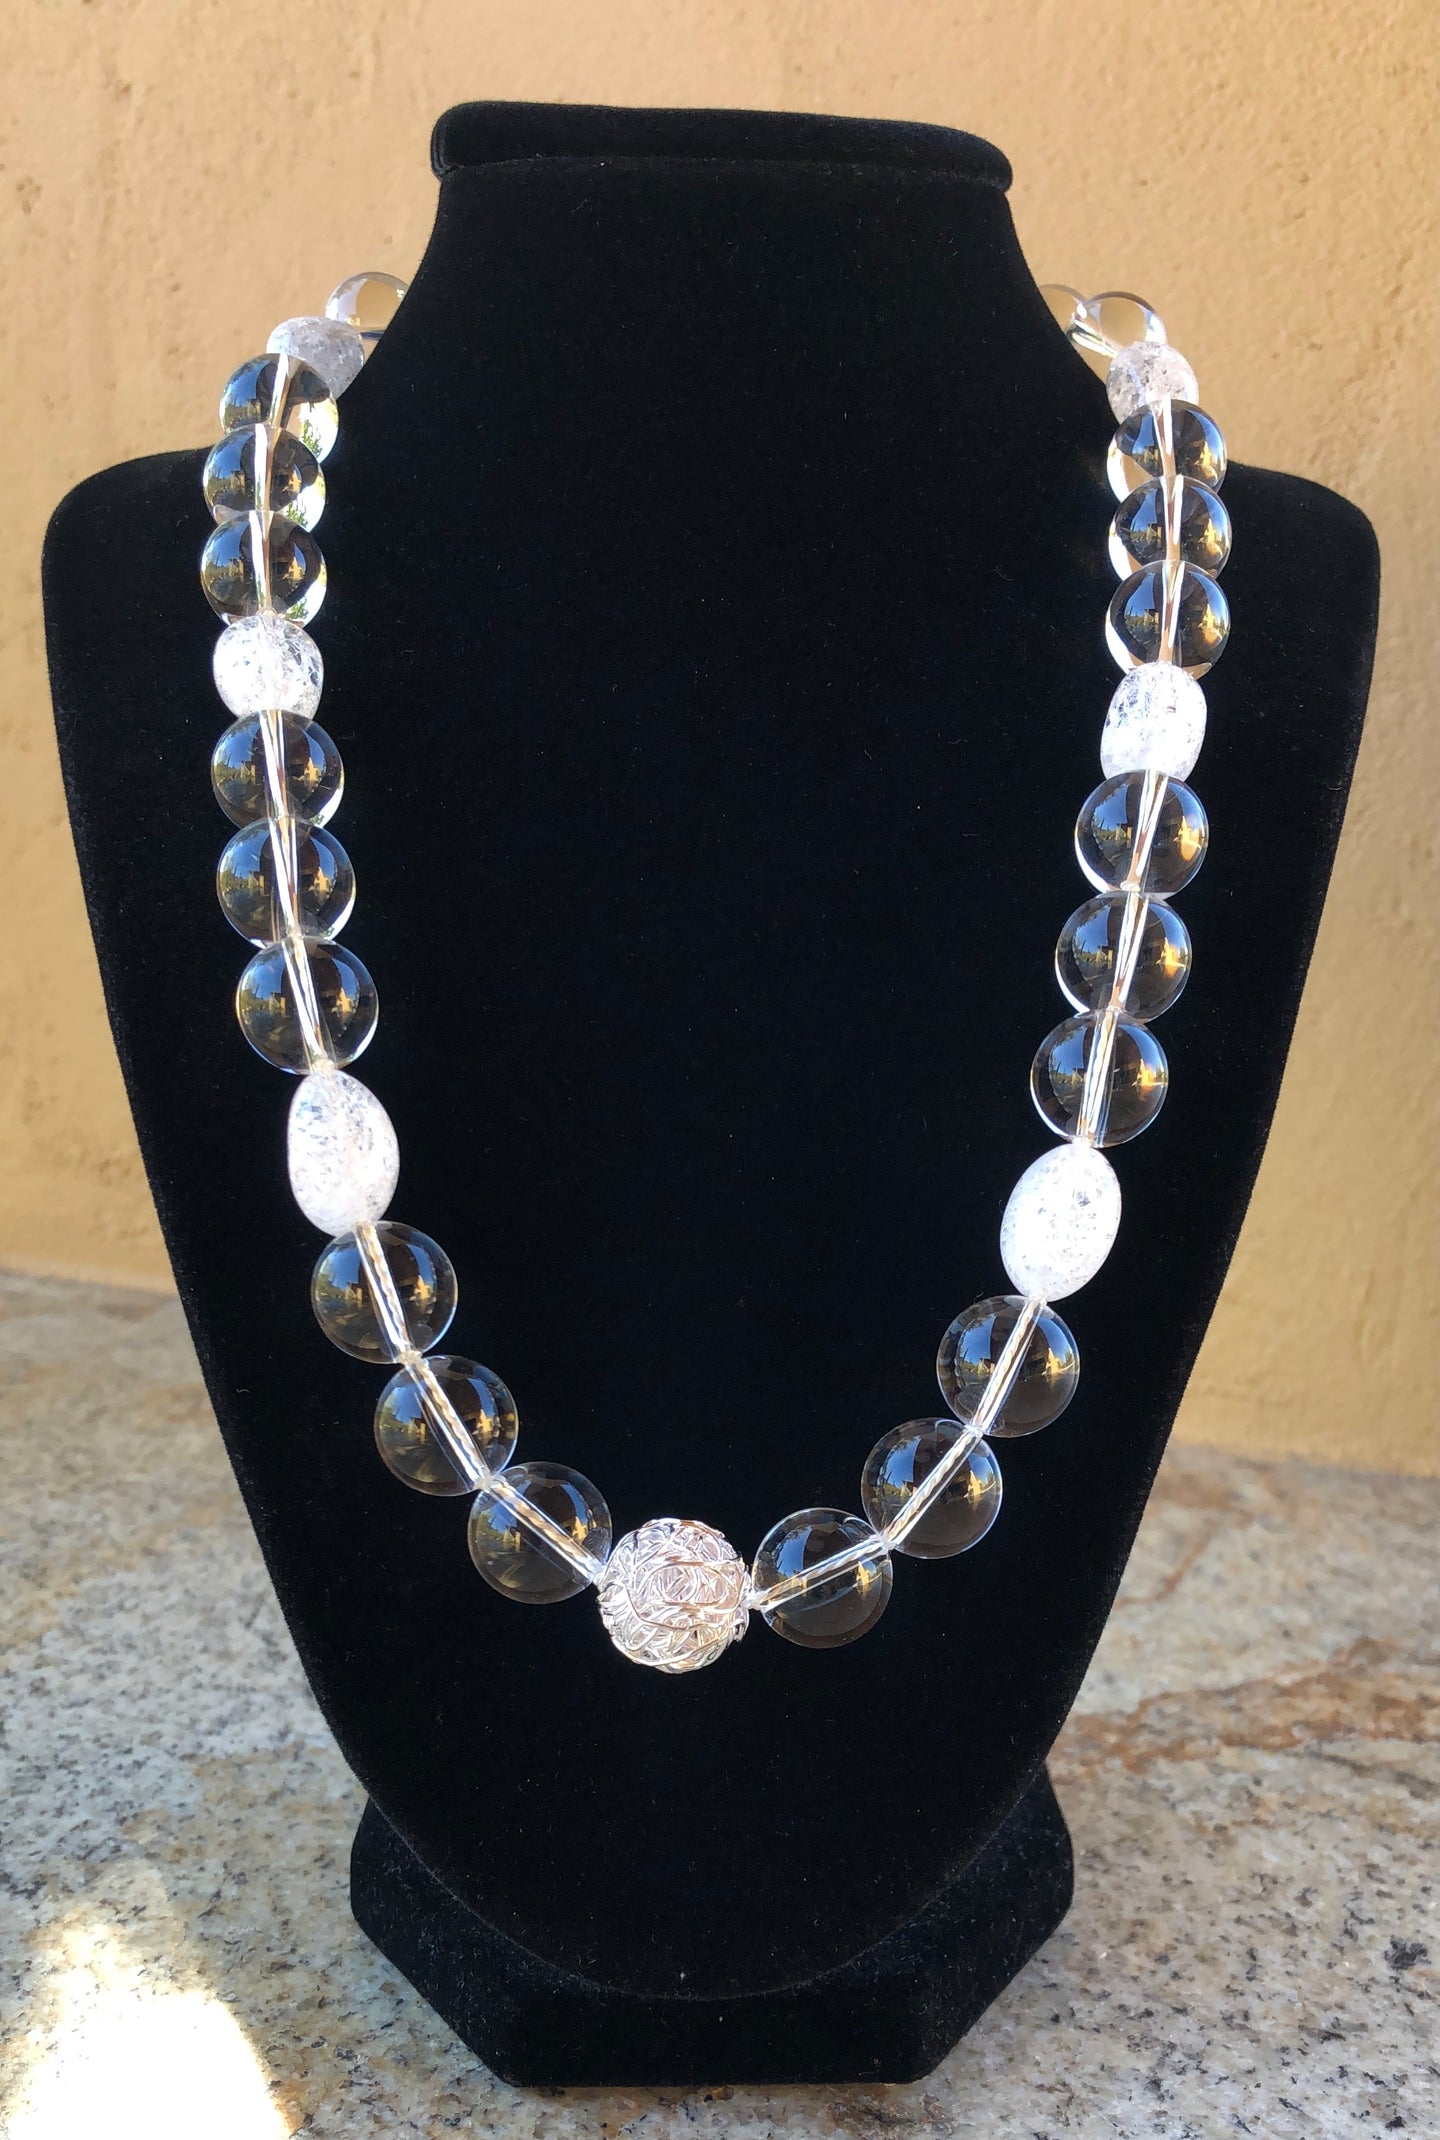 Necklace - Clear and Cracked Crystal round beads